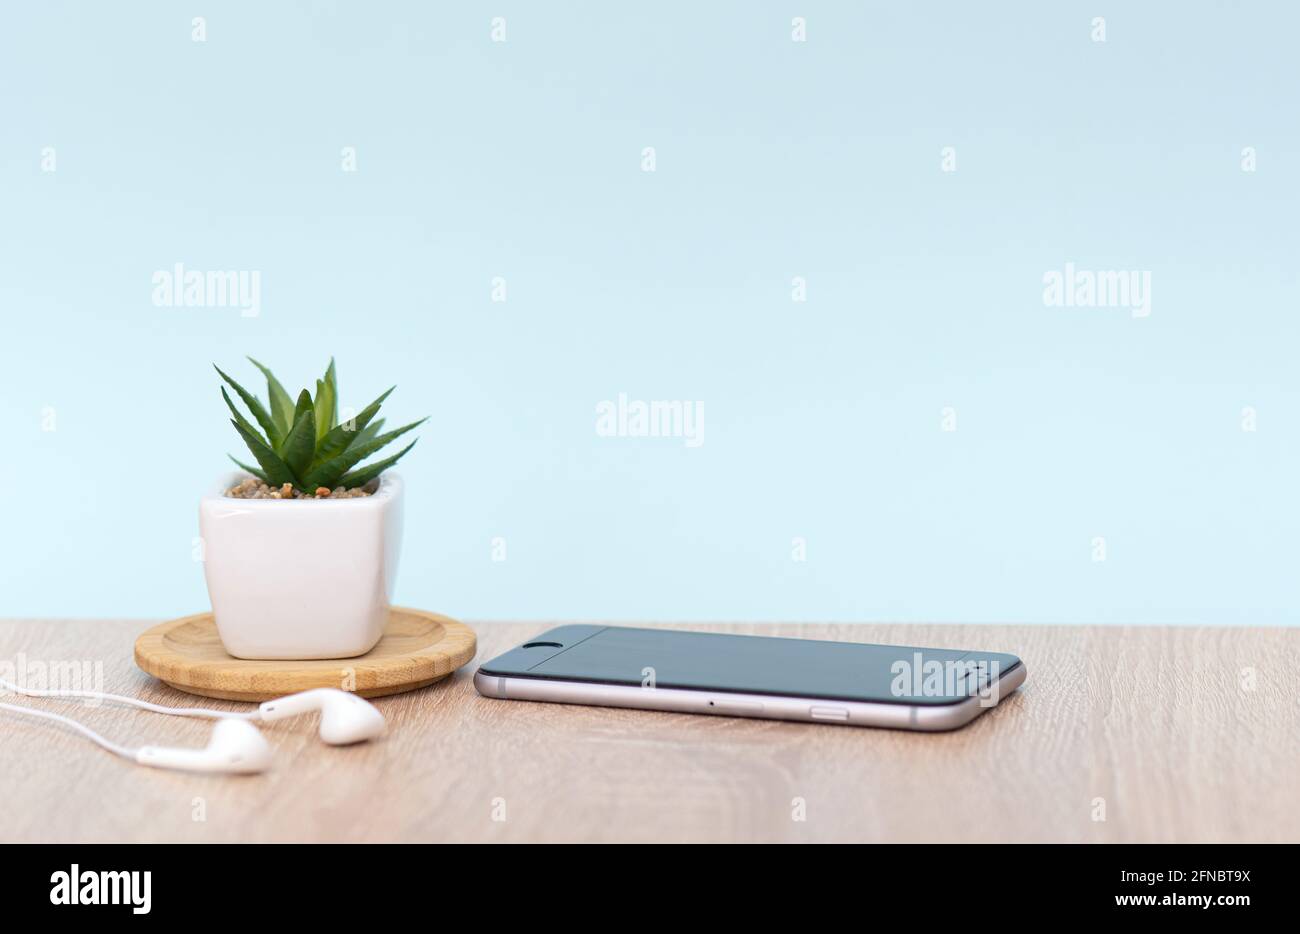 Workplace at an office, desk with mobile phone, headphones, houseplant. Interior with blue wall, brown table. Concept picture. Stock Photo